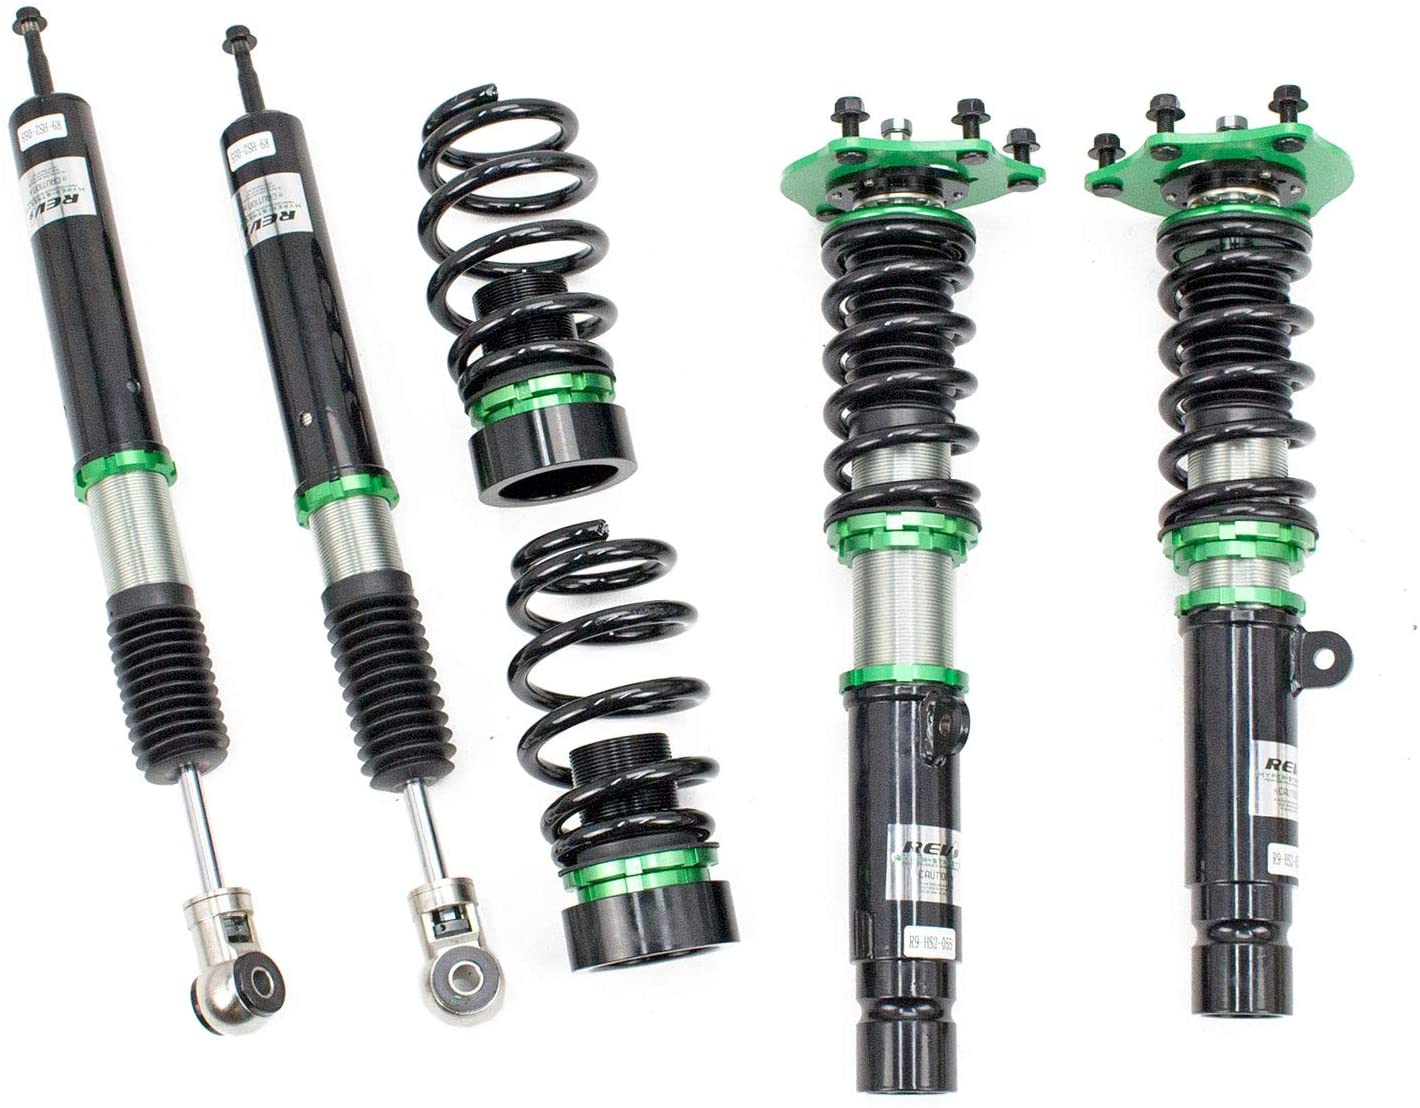 Rev9 R9-HS2-054 Hyper-Street II Coild Setting, Full Length Adjustable, compatible with Honda Civic Coupe/Sedan NONE-SI (FC) 2016-20